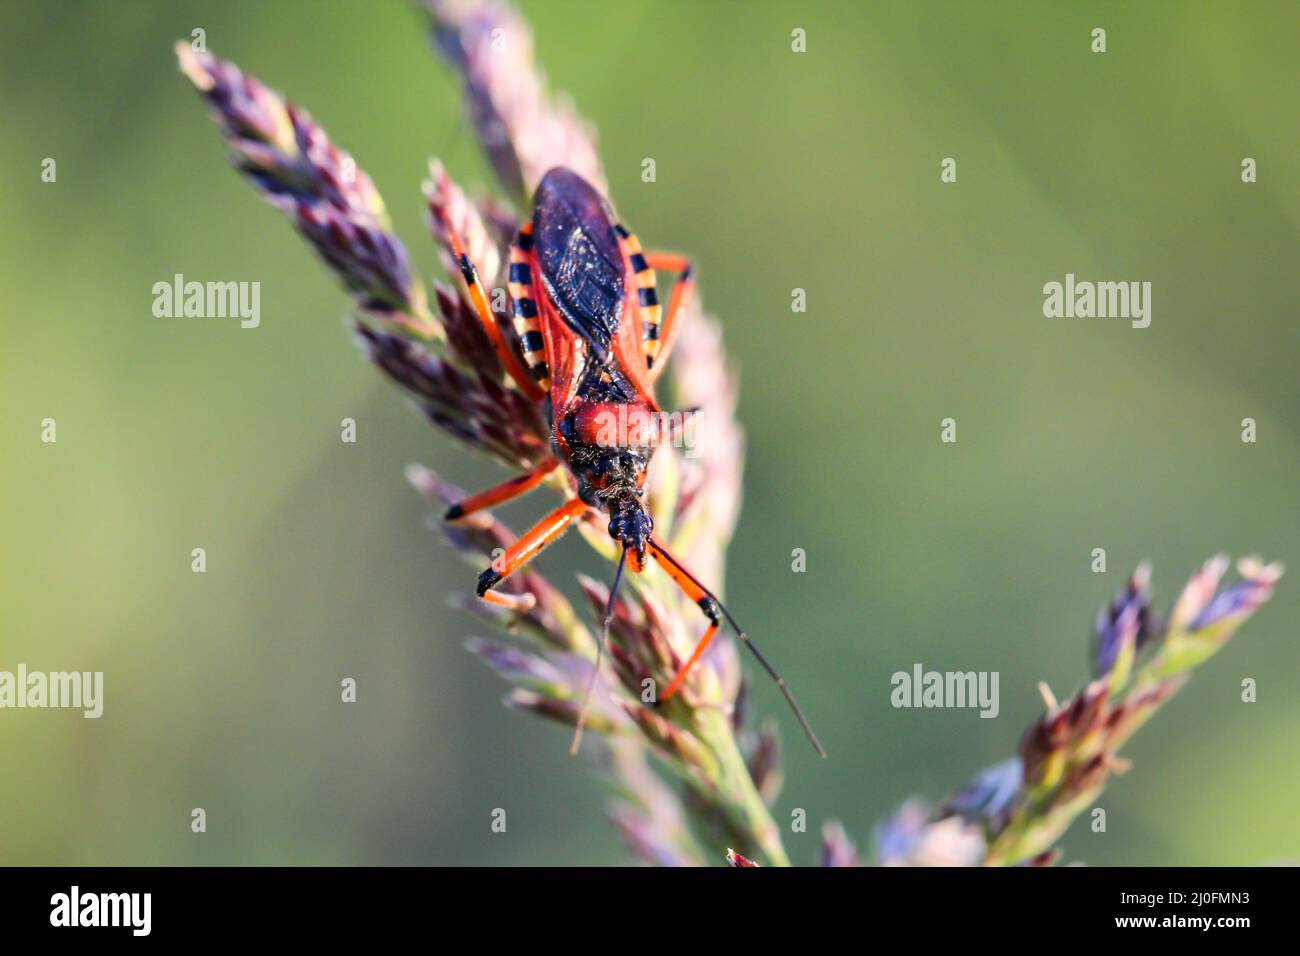 A close-up of a bug on a plant. Stock Photo